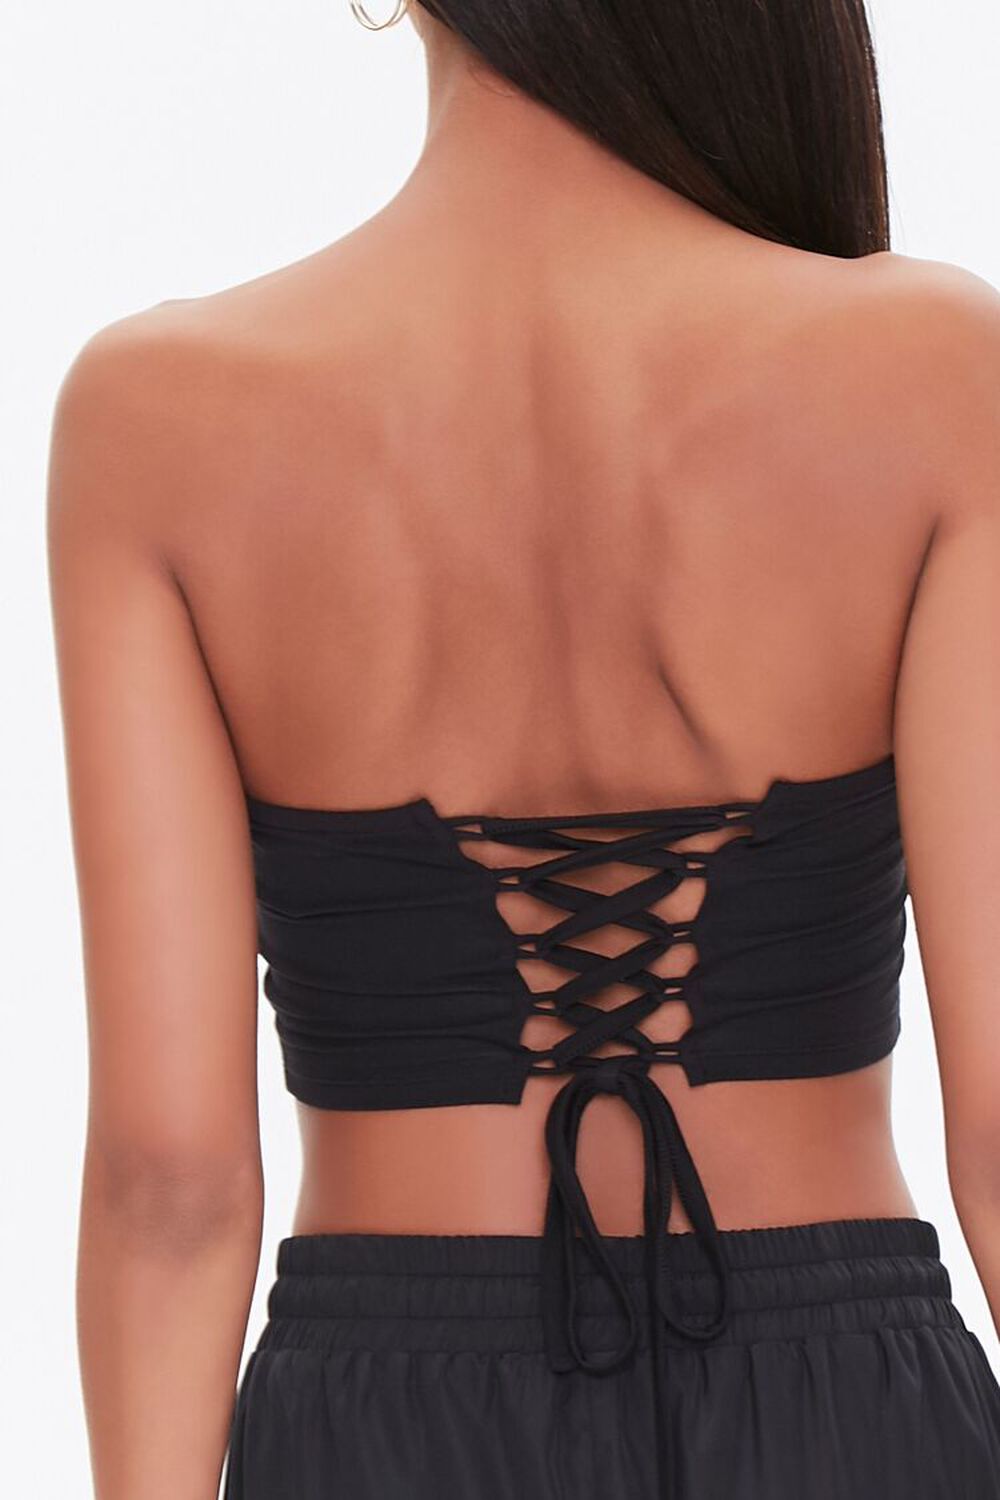 BLACK Lace-Up Tube Top, image 2